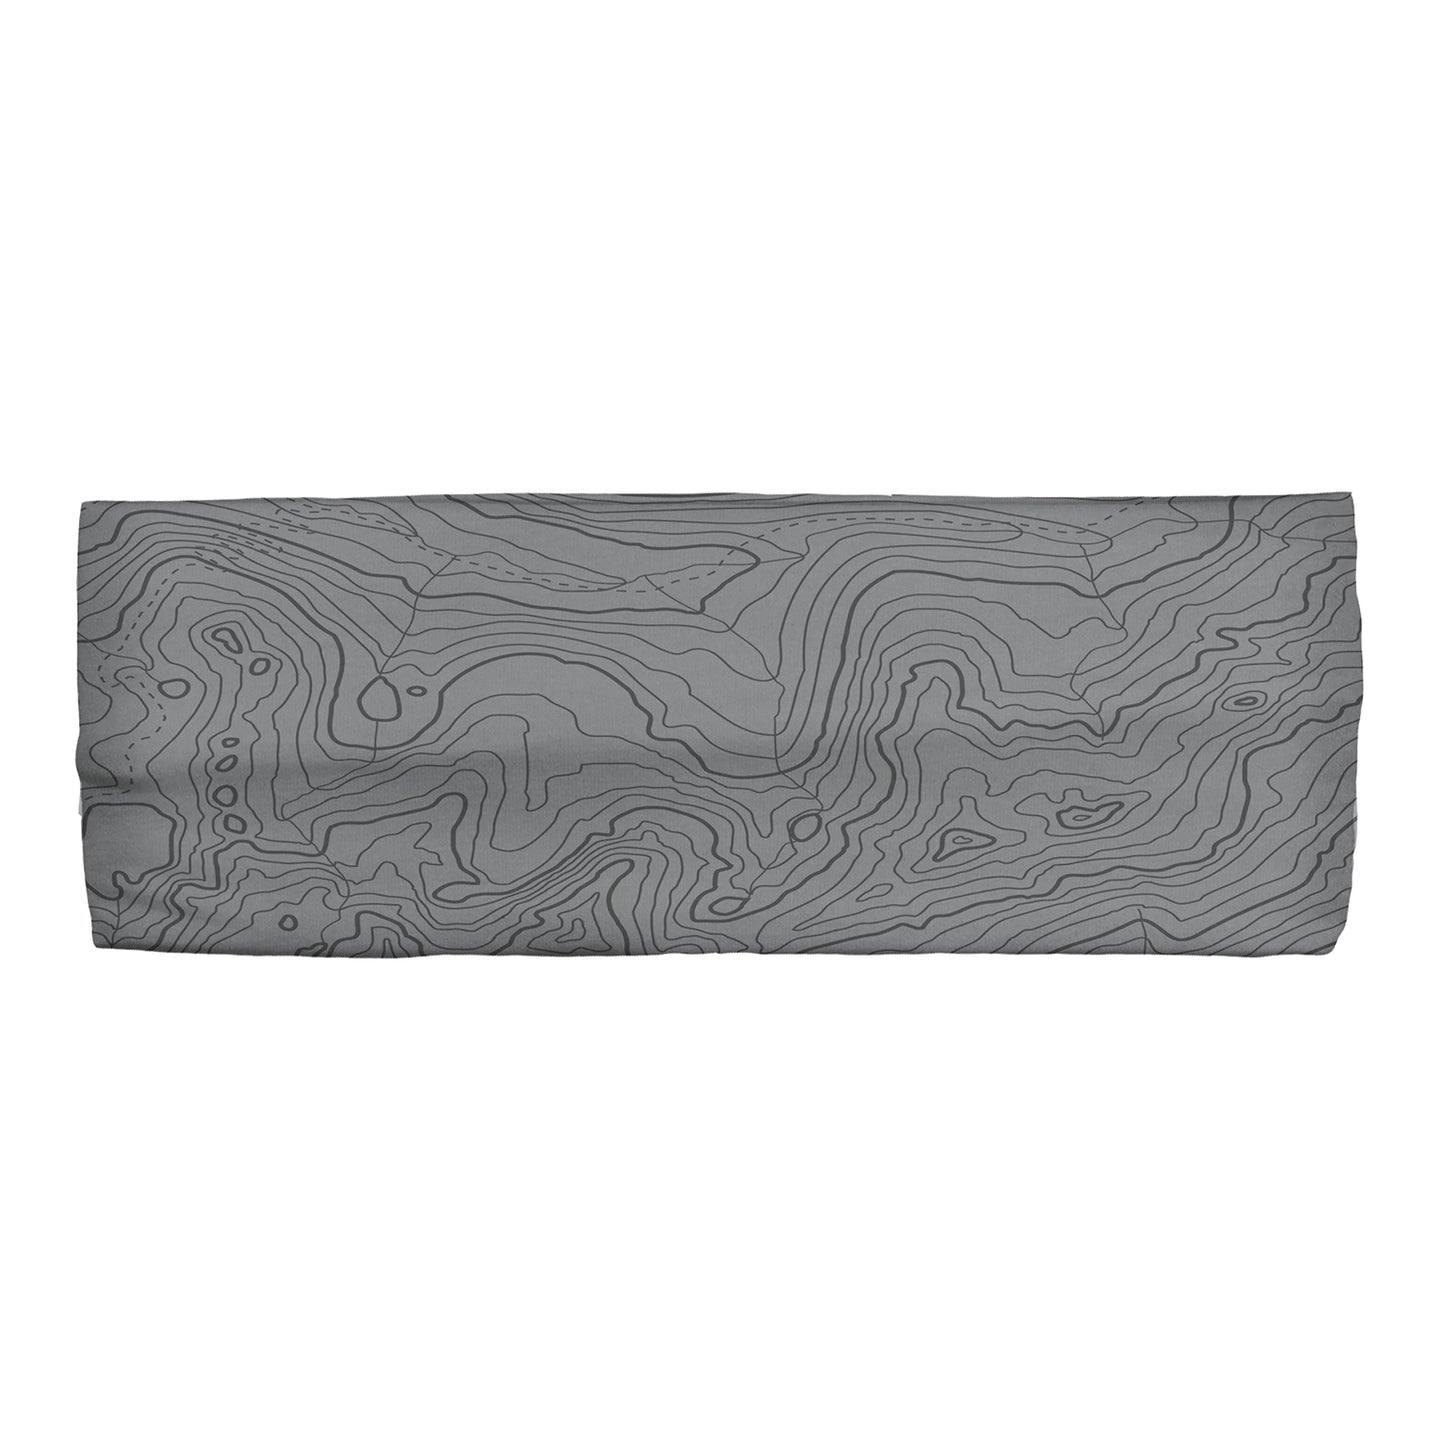 A headband has topo lines printed on it